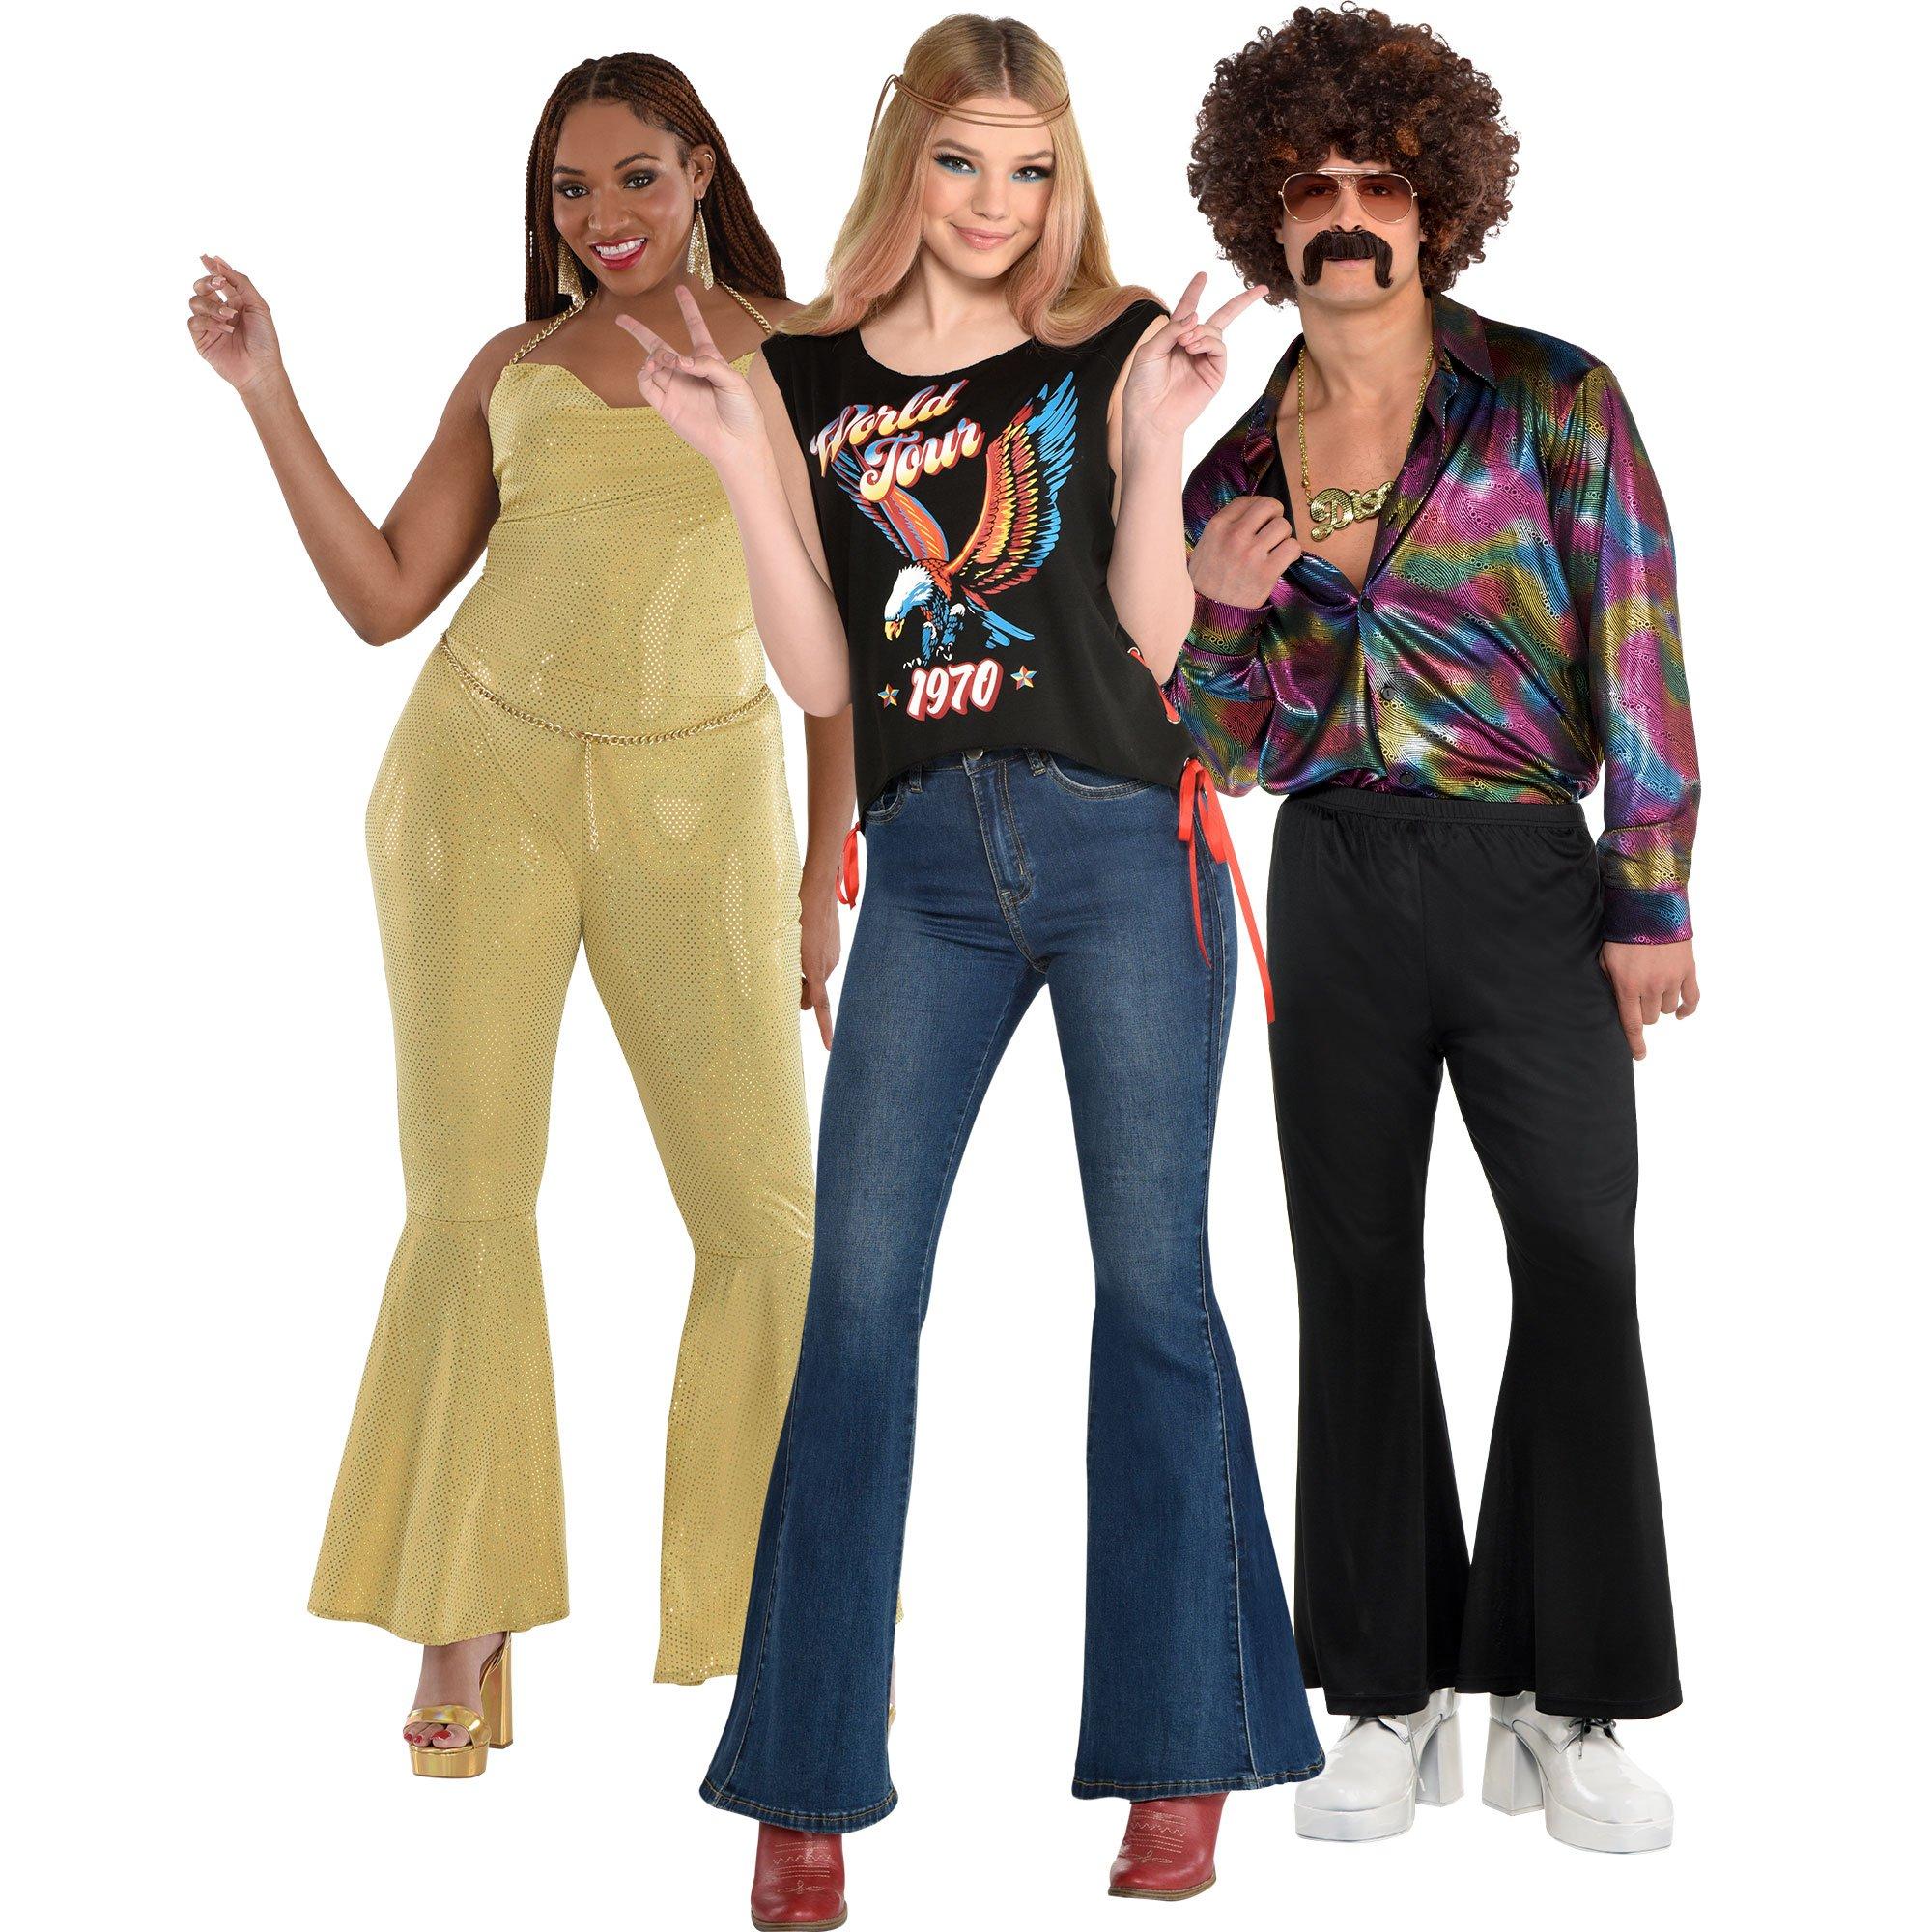 Shop the Look: 70s Costume Collection | Party City